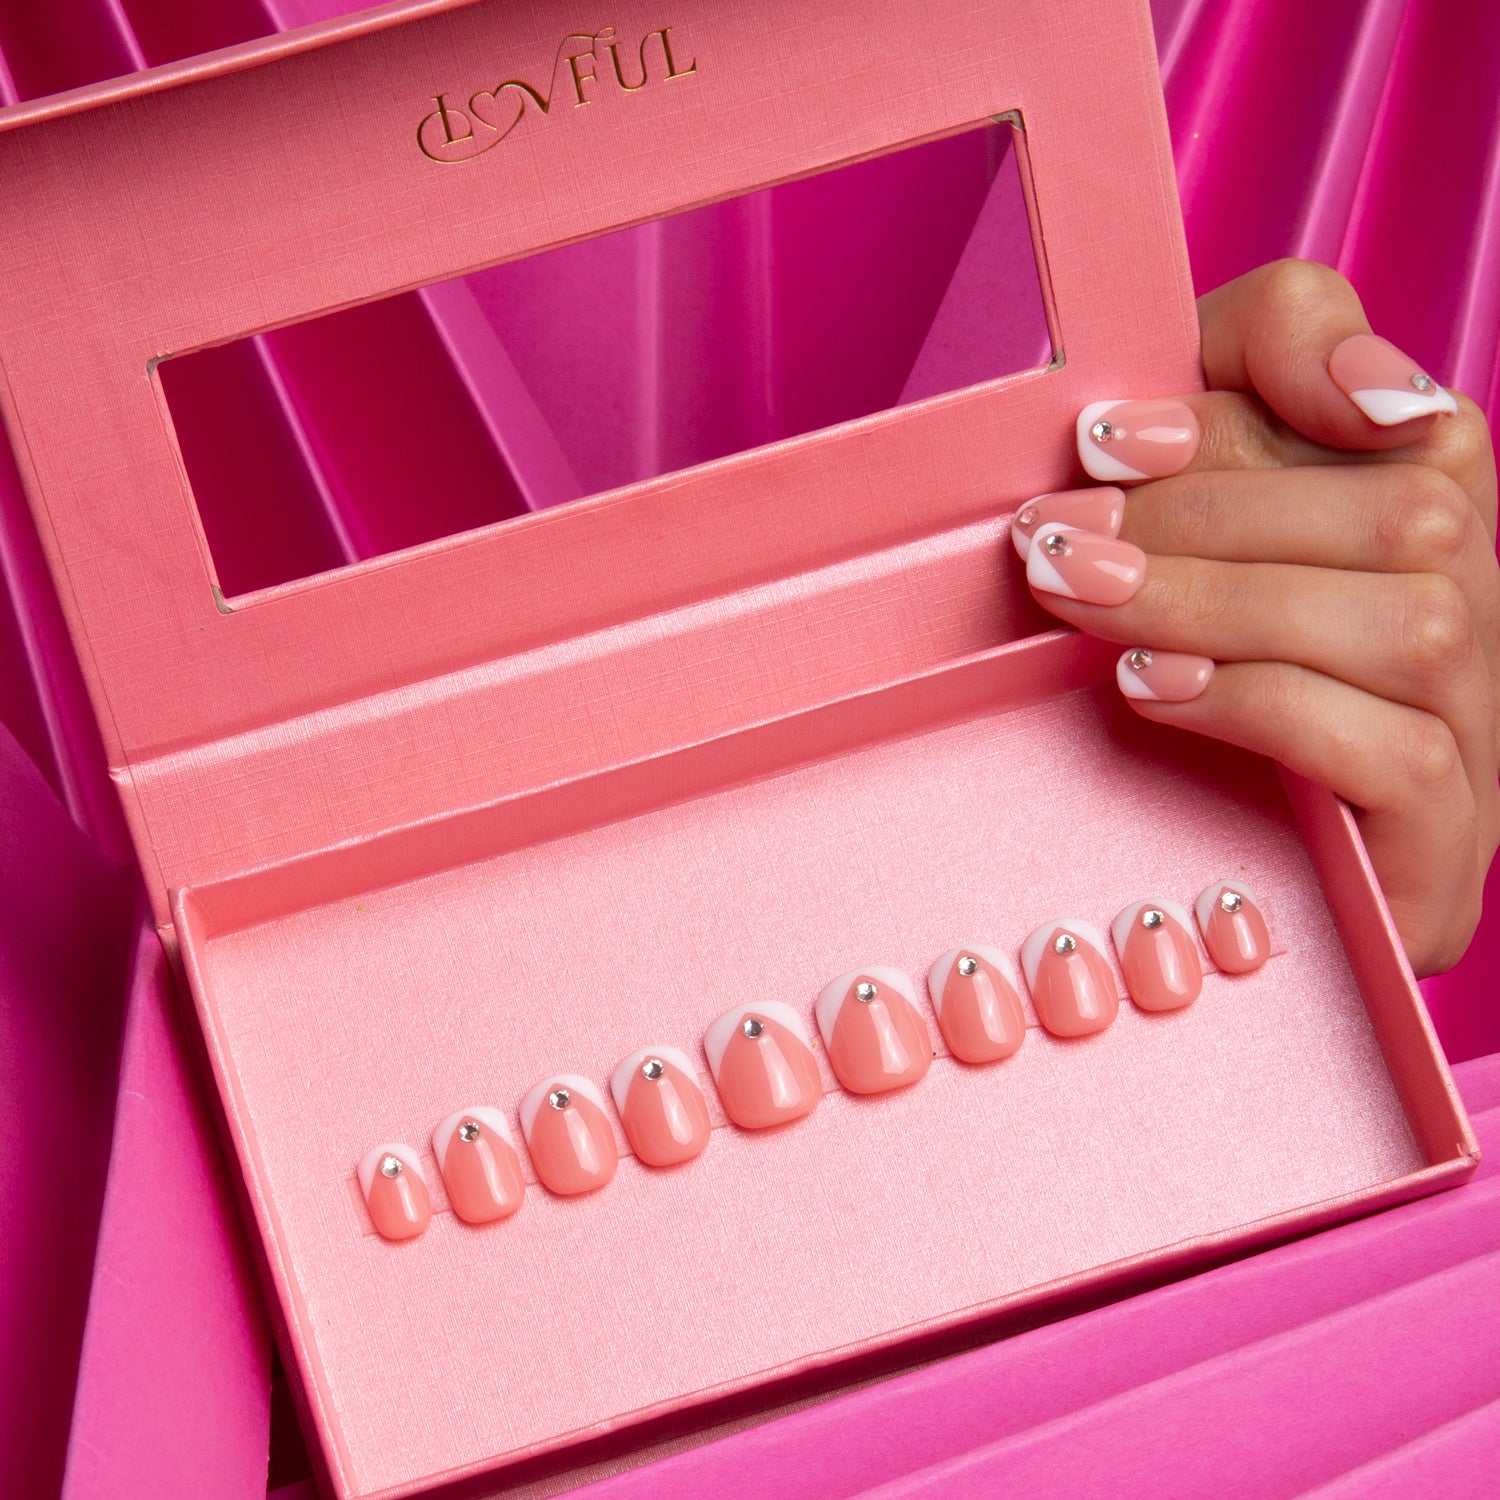 Eternal Polaris press-on nails with white triangle French tips and rhinestones from Lovful, displayed in a pink case with a hand model showcasing the nails